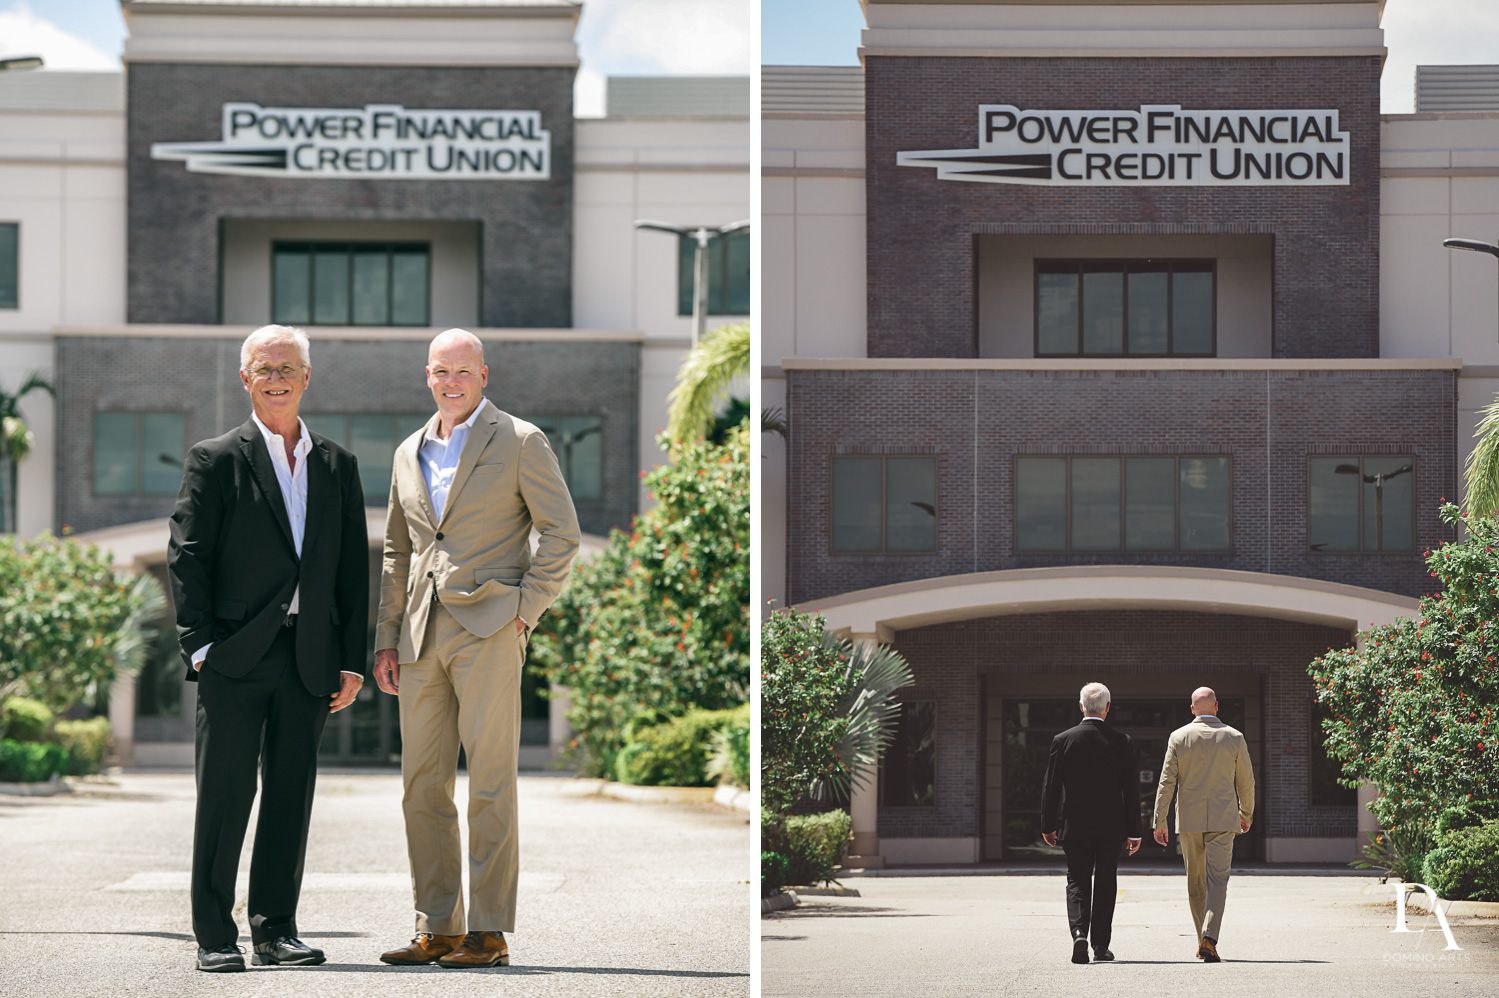 Merger at Corporate Photography Power Financial Credit Union in Pembroke PinesCorporate Photography Power Financial Credit Union in Pembroke Pines